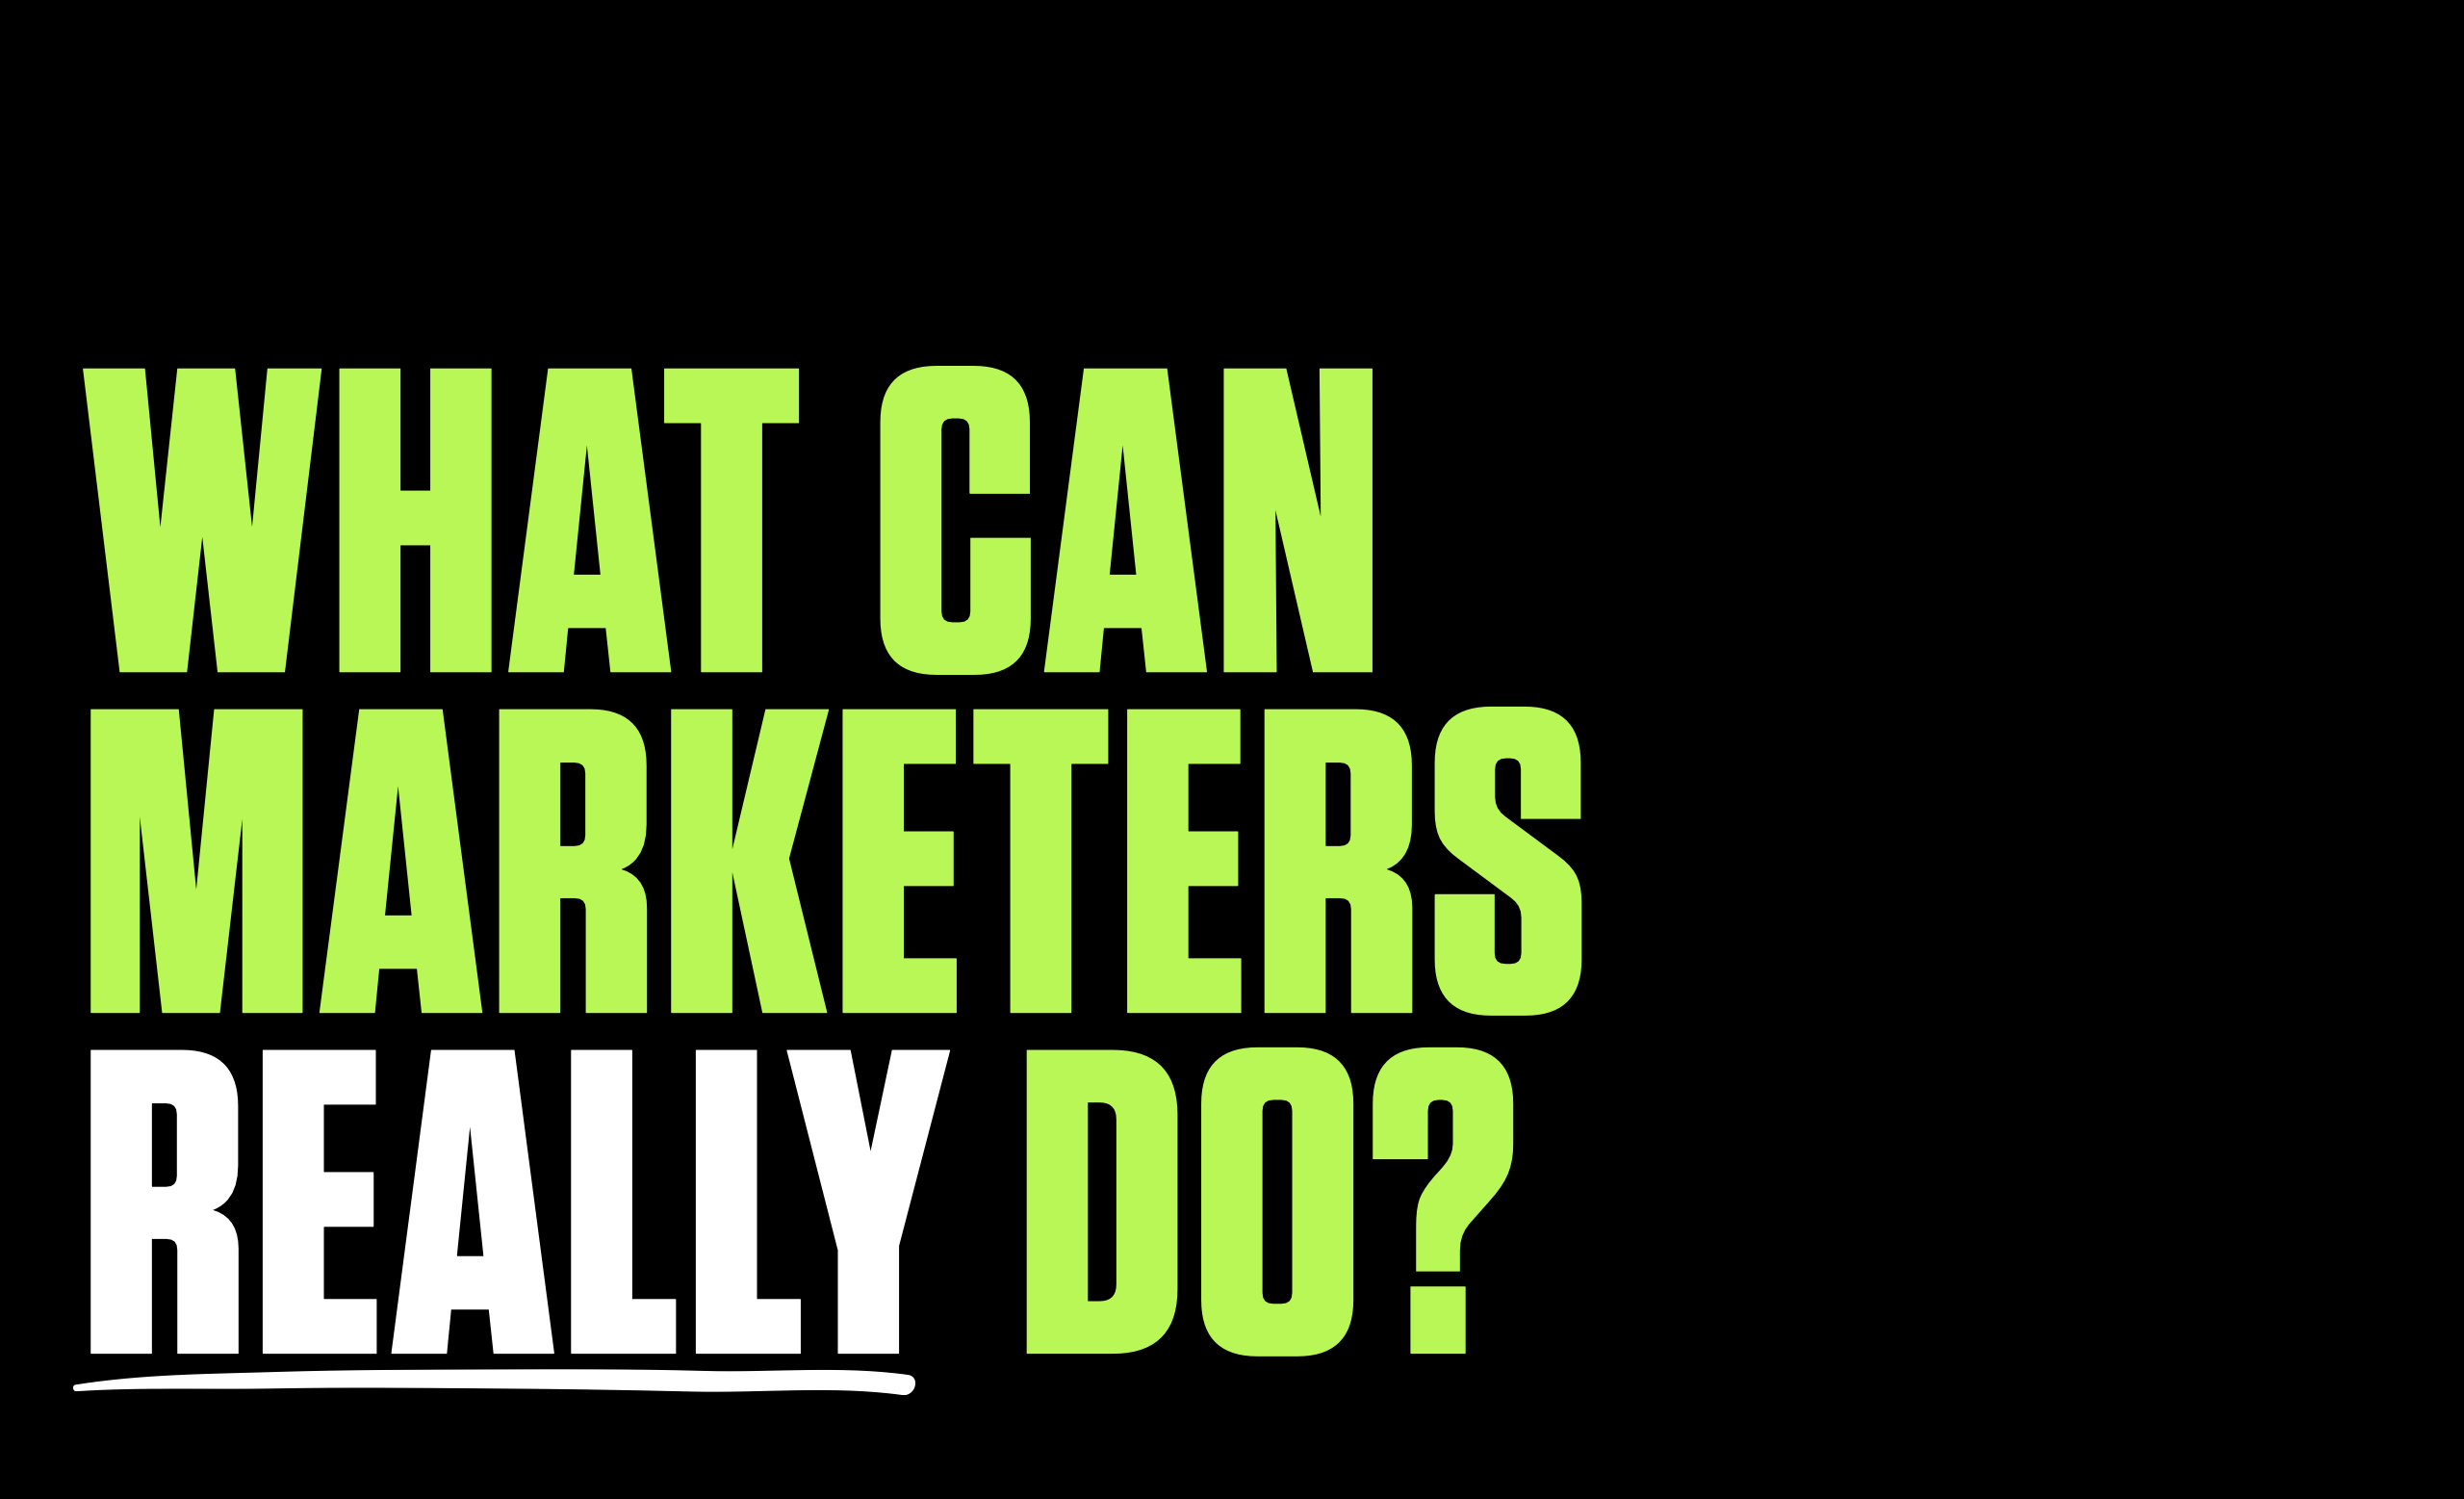 What can marketers really do